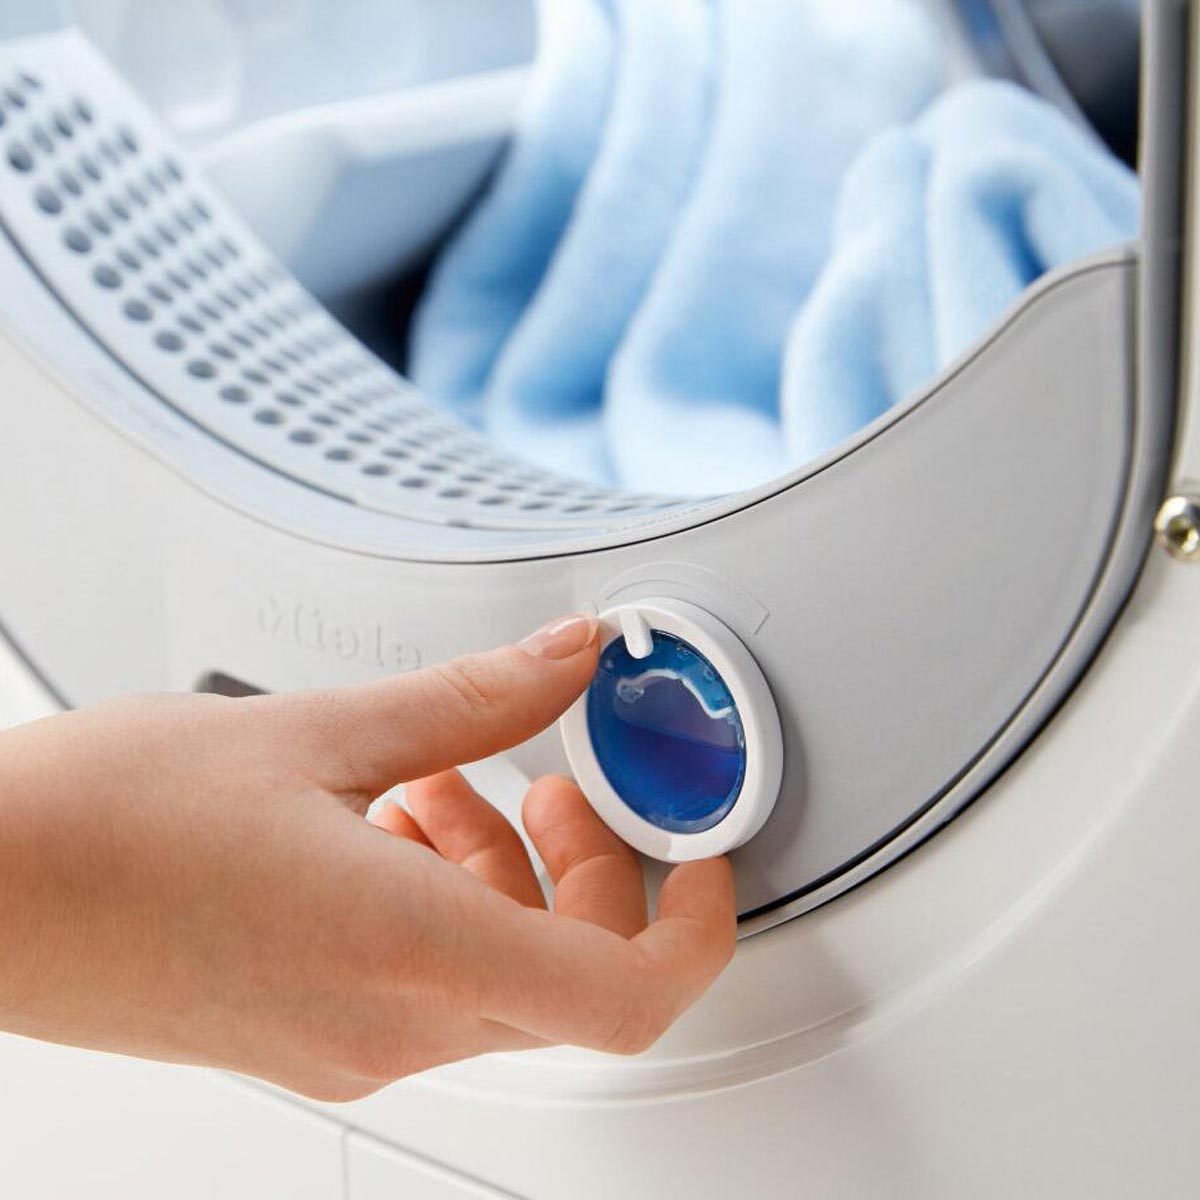 Know About Heat Pump Clothes Dryers